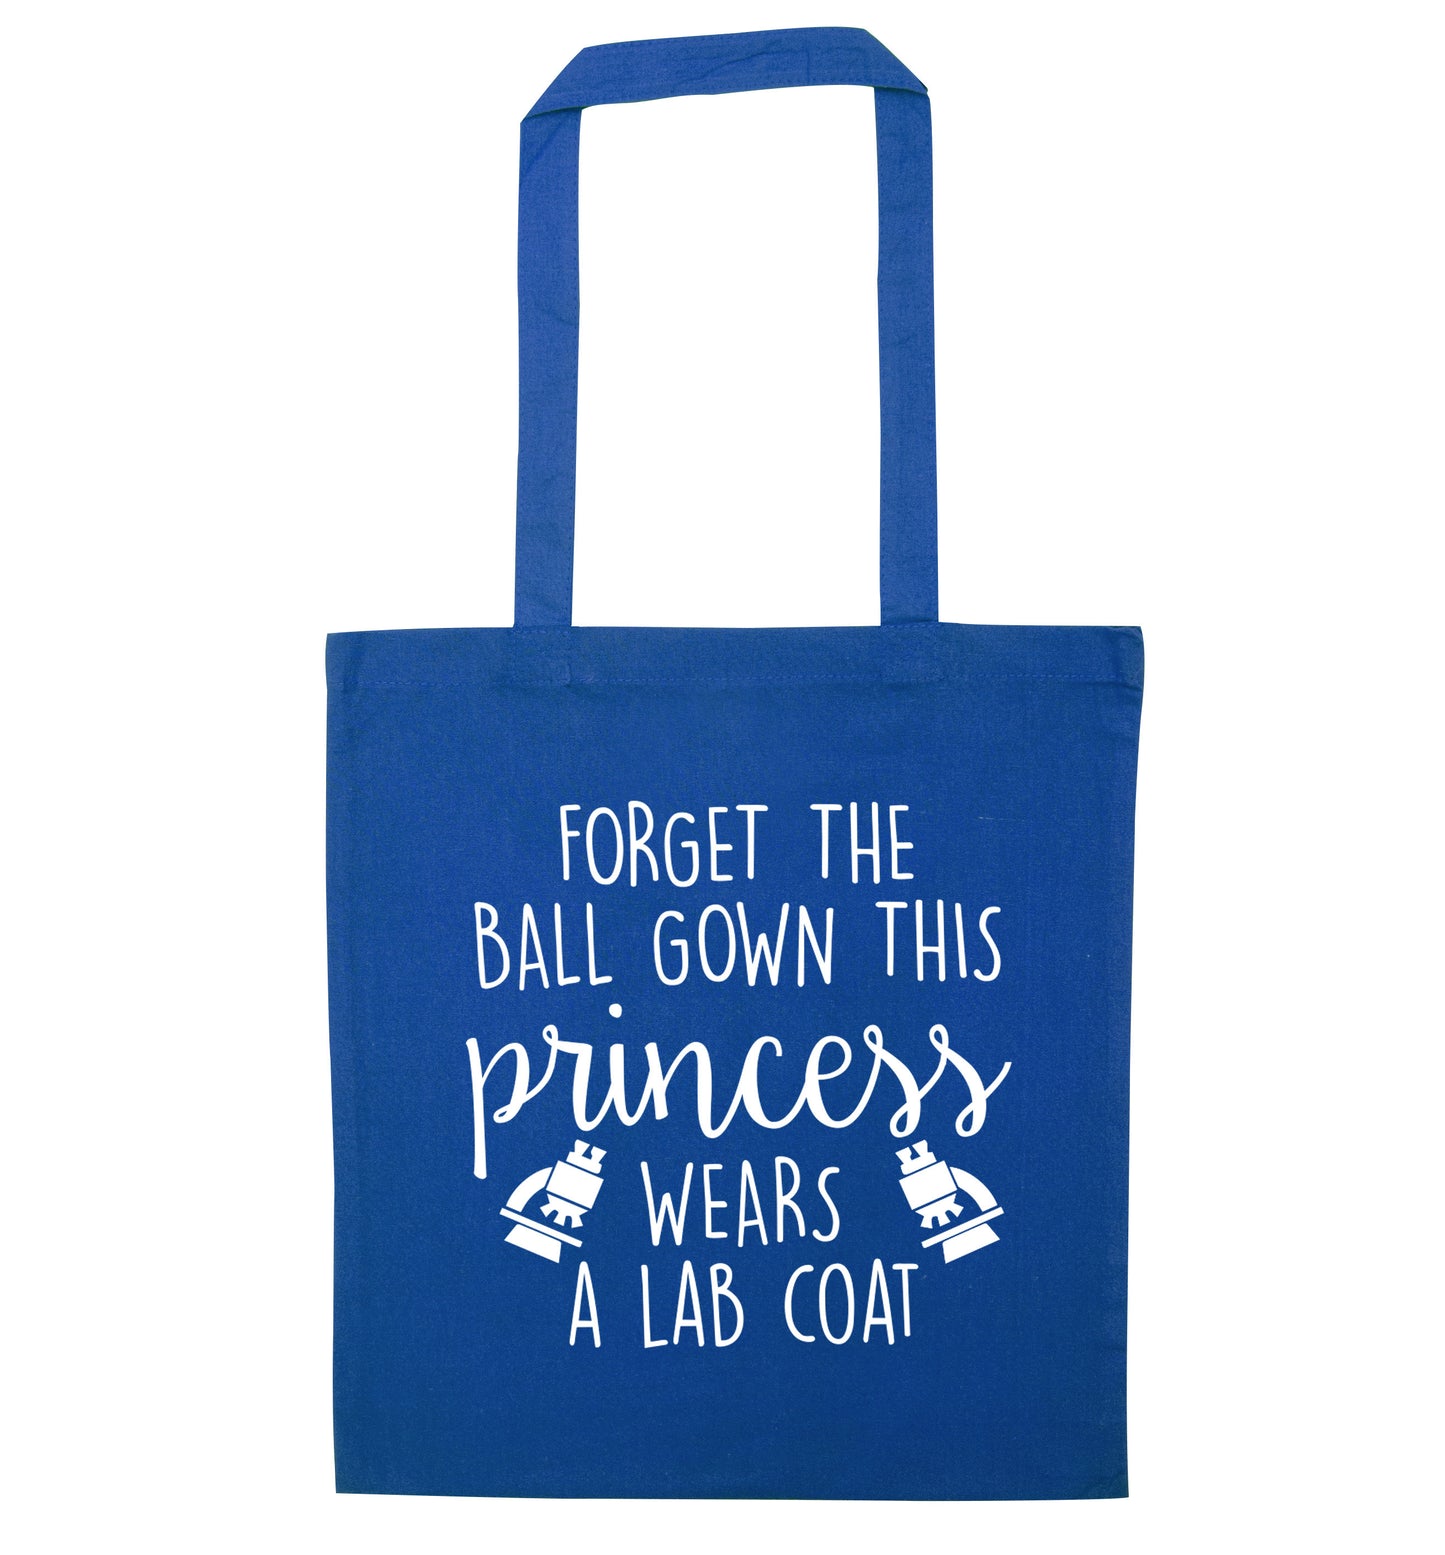 Forget the ball gown this princess wears a lab coat blue tote bag